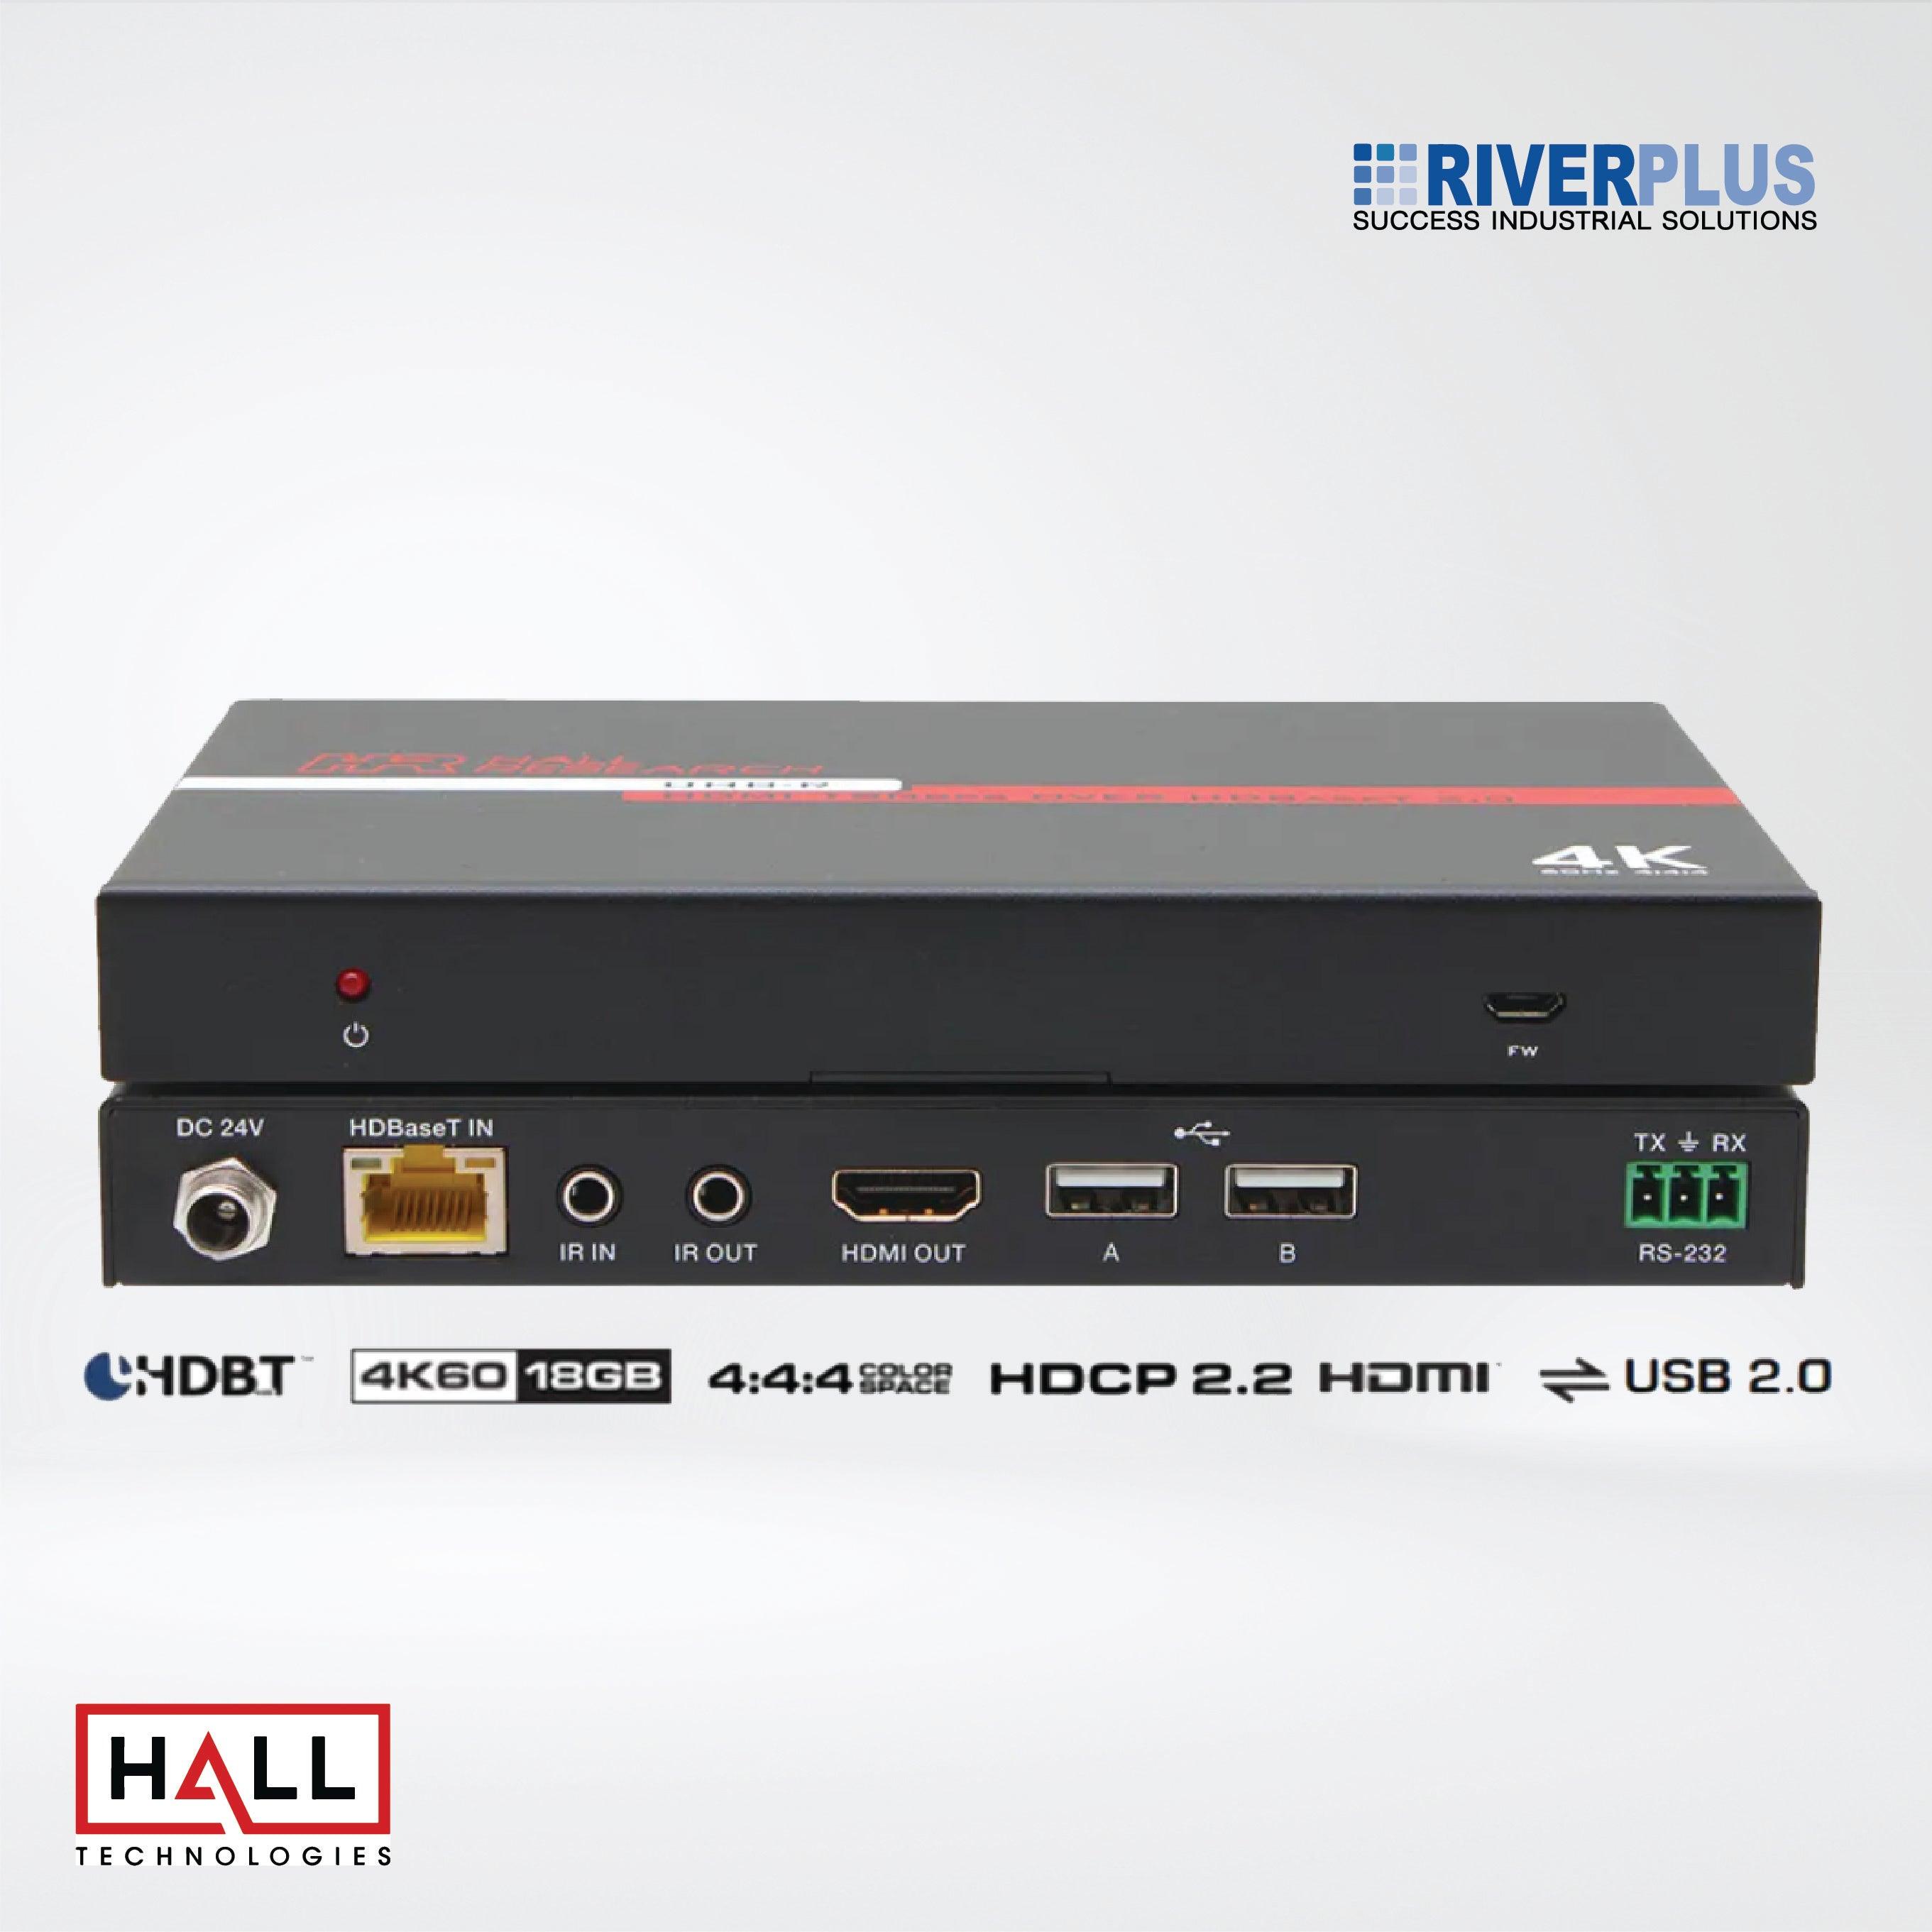 UHB-SW2 Auto-Switching HDMI, VGA and USB Extension System - Riverplus